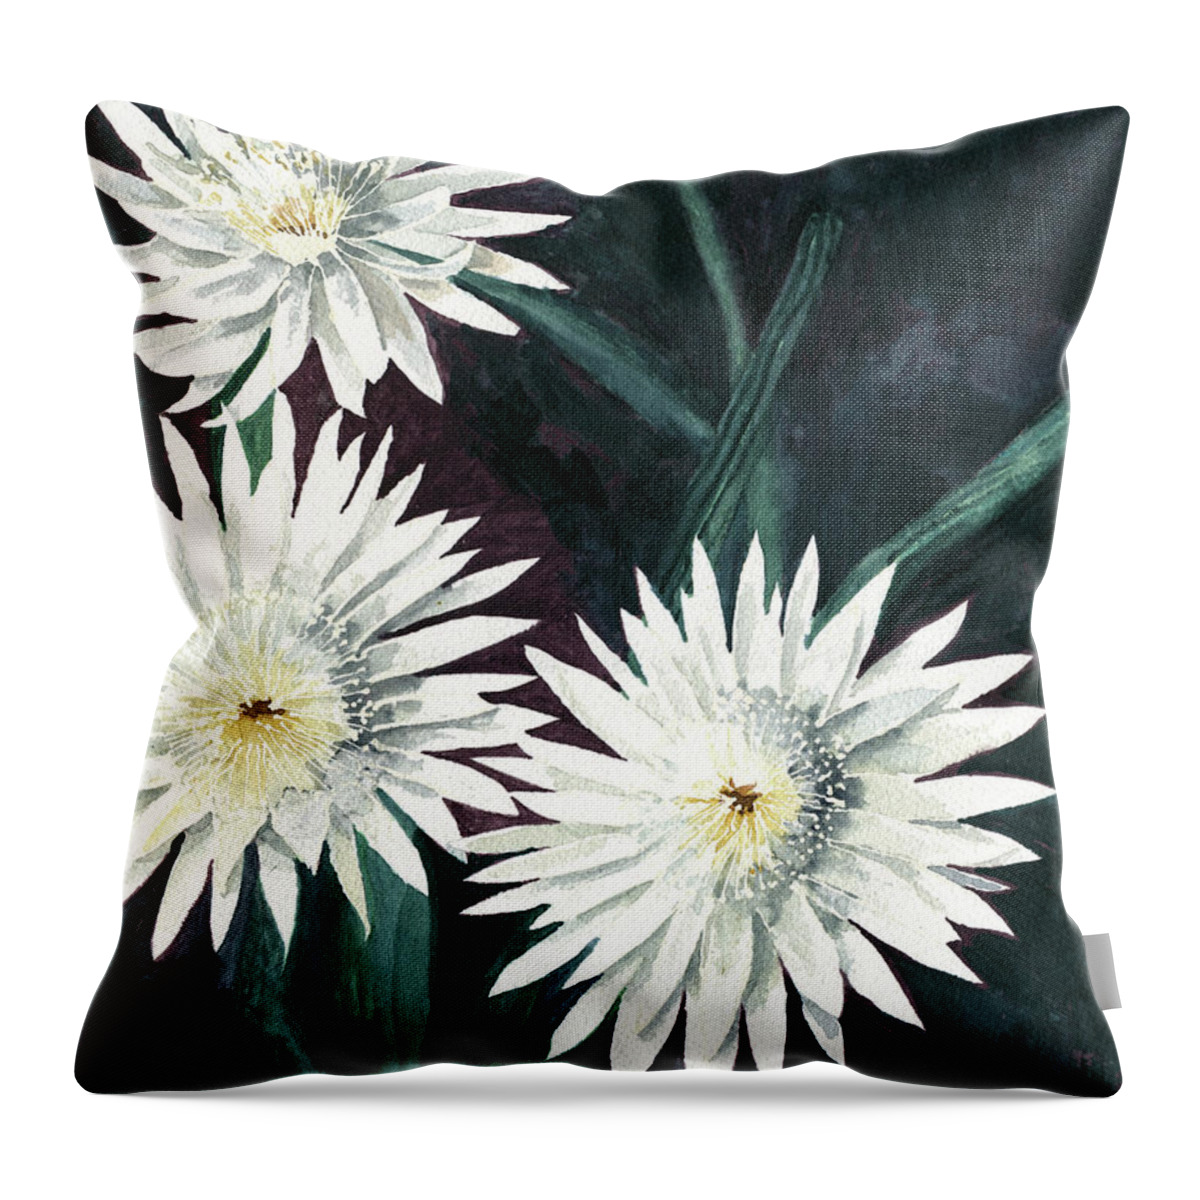 Cactus Throw Pillow featuring the painting Arizona Queen of the Night by Eric Samuelson